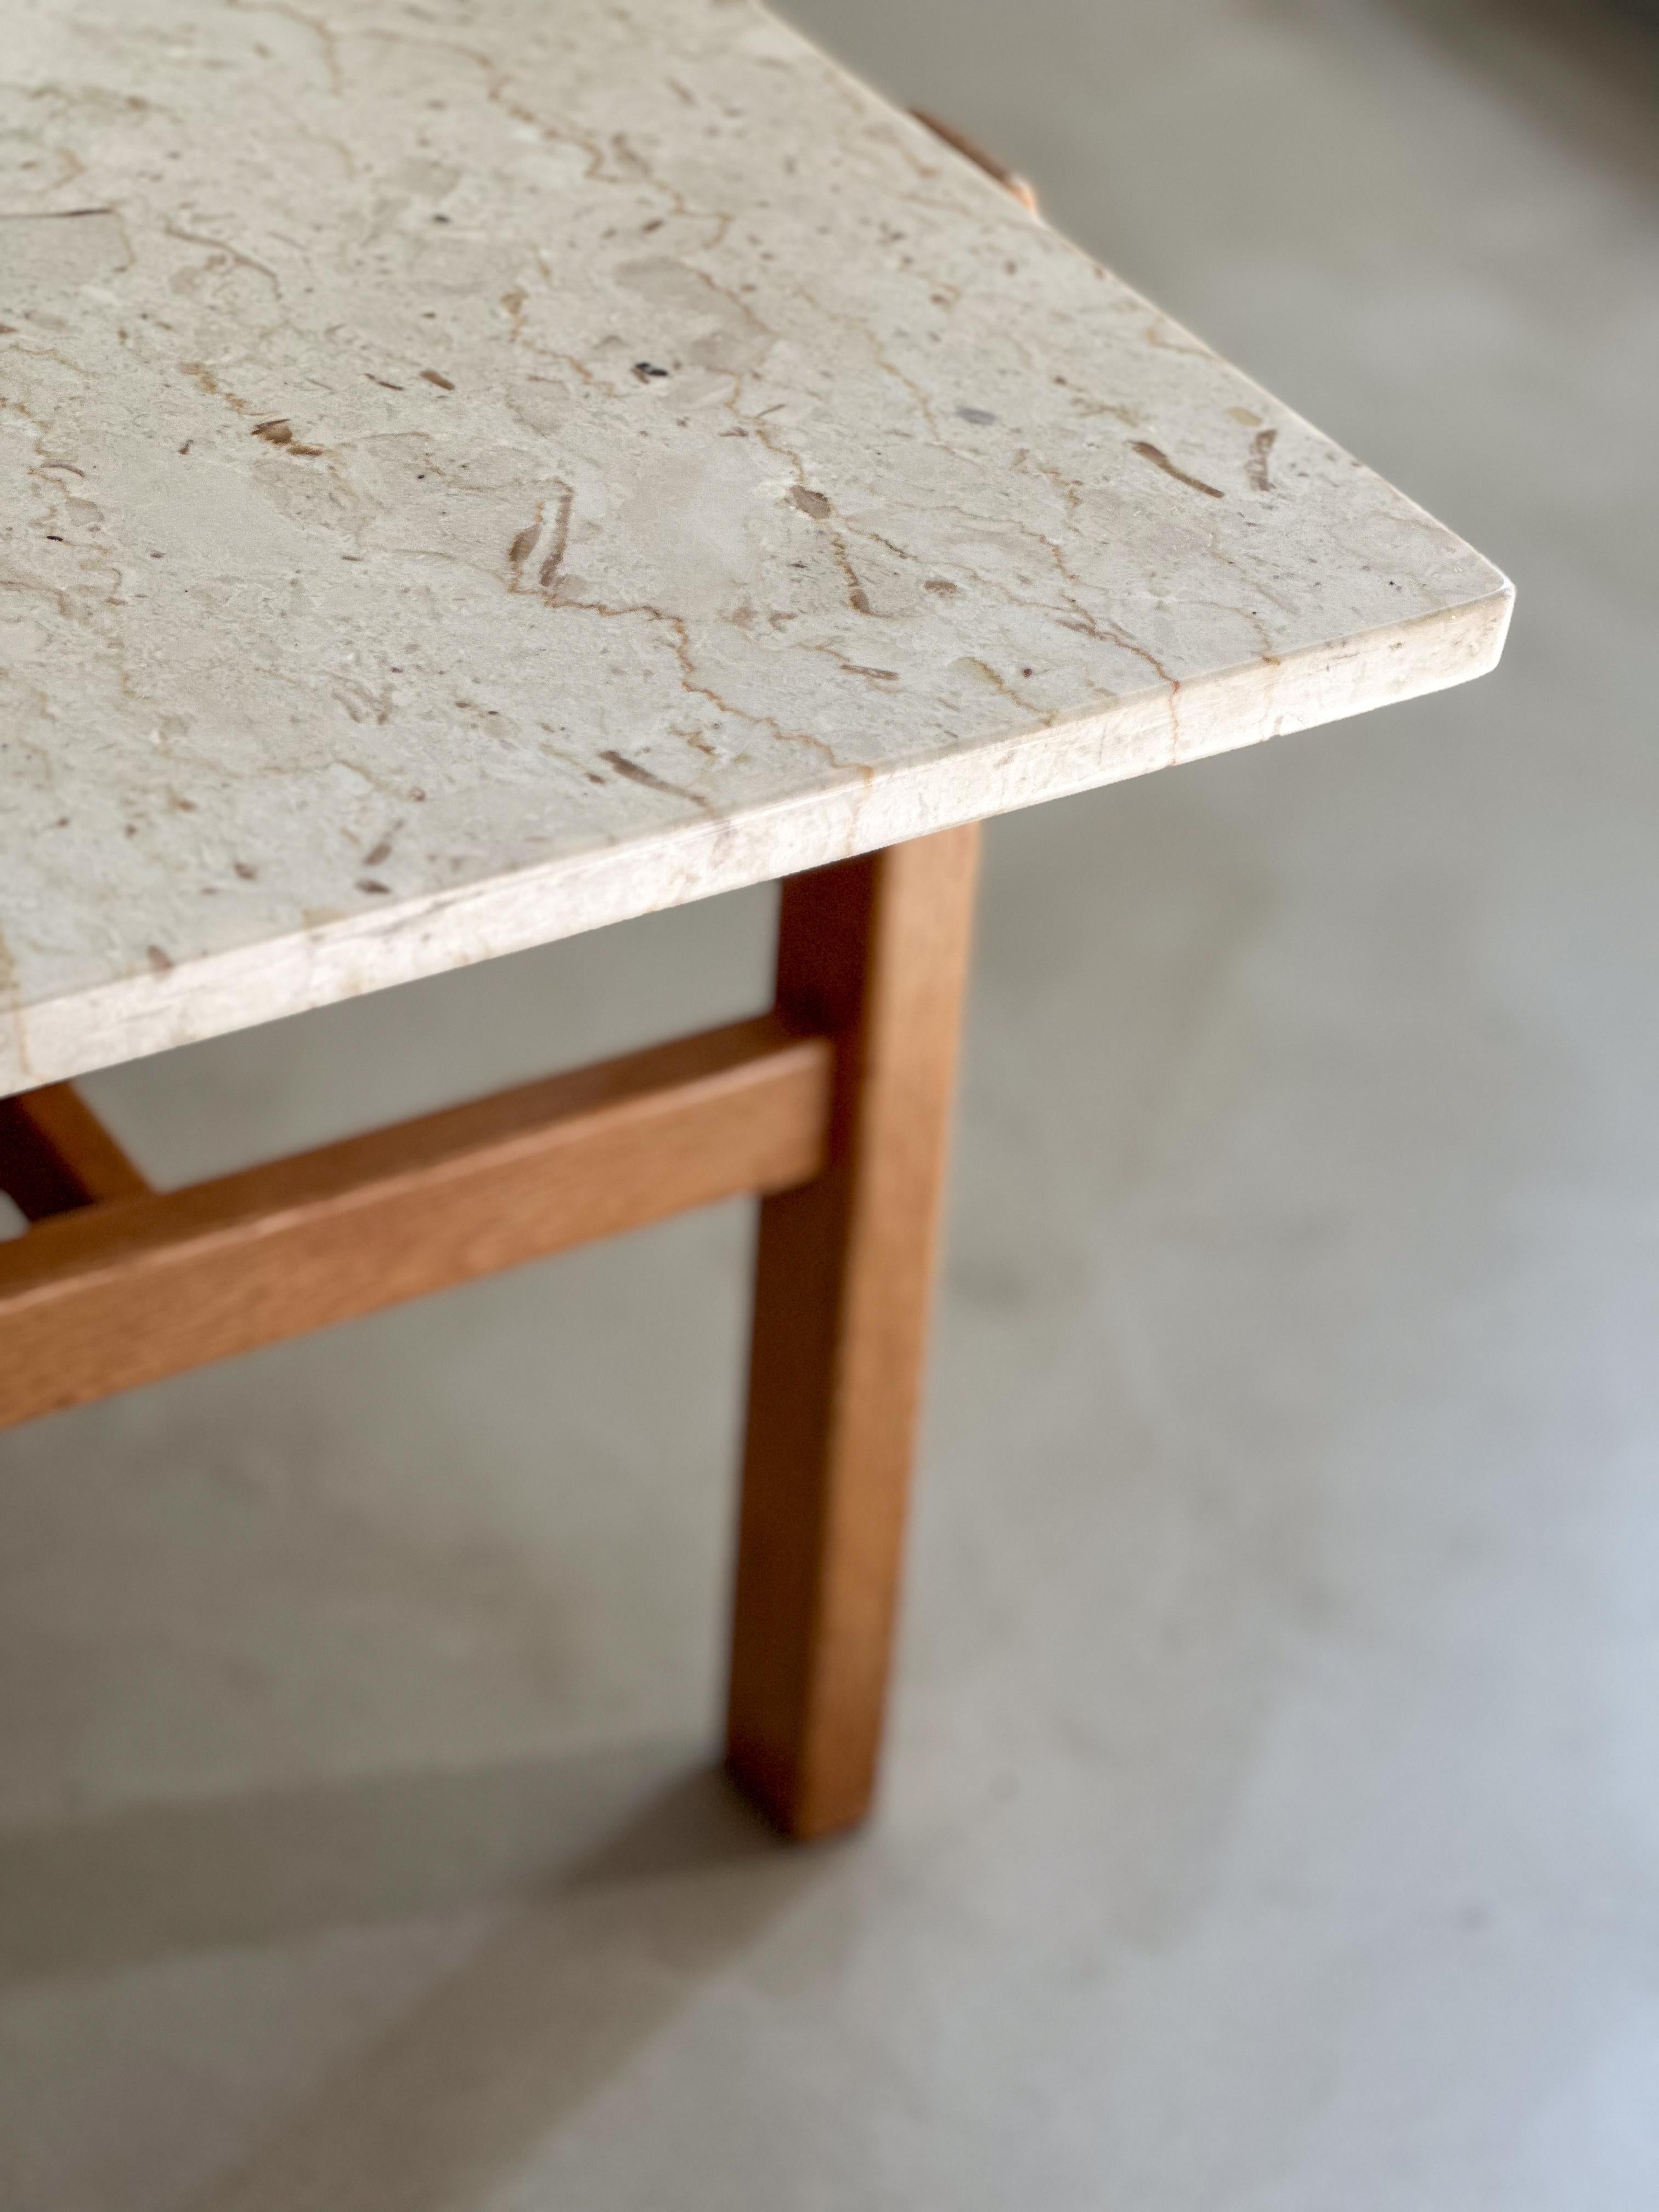 Oak and marble coffee table designed by Swedish furniture designer Inge Davidson and crafted by cabinetmaker Ernst Johansson, Långås, Sweden. The model was launched in 1964 and was produced in different combinations of wood and stone as well as